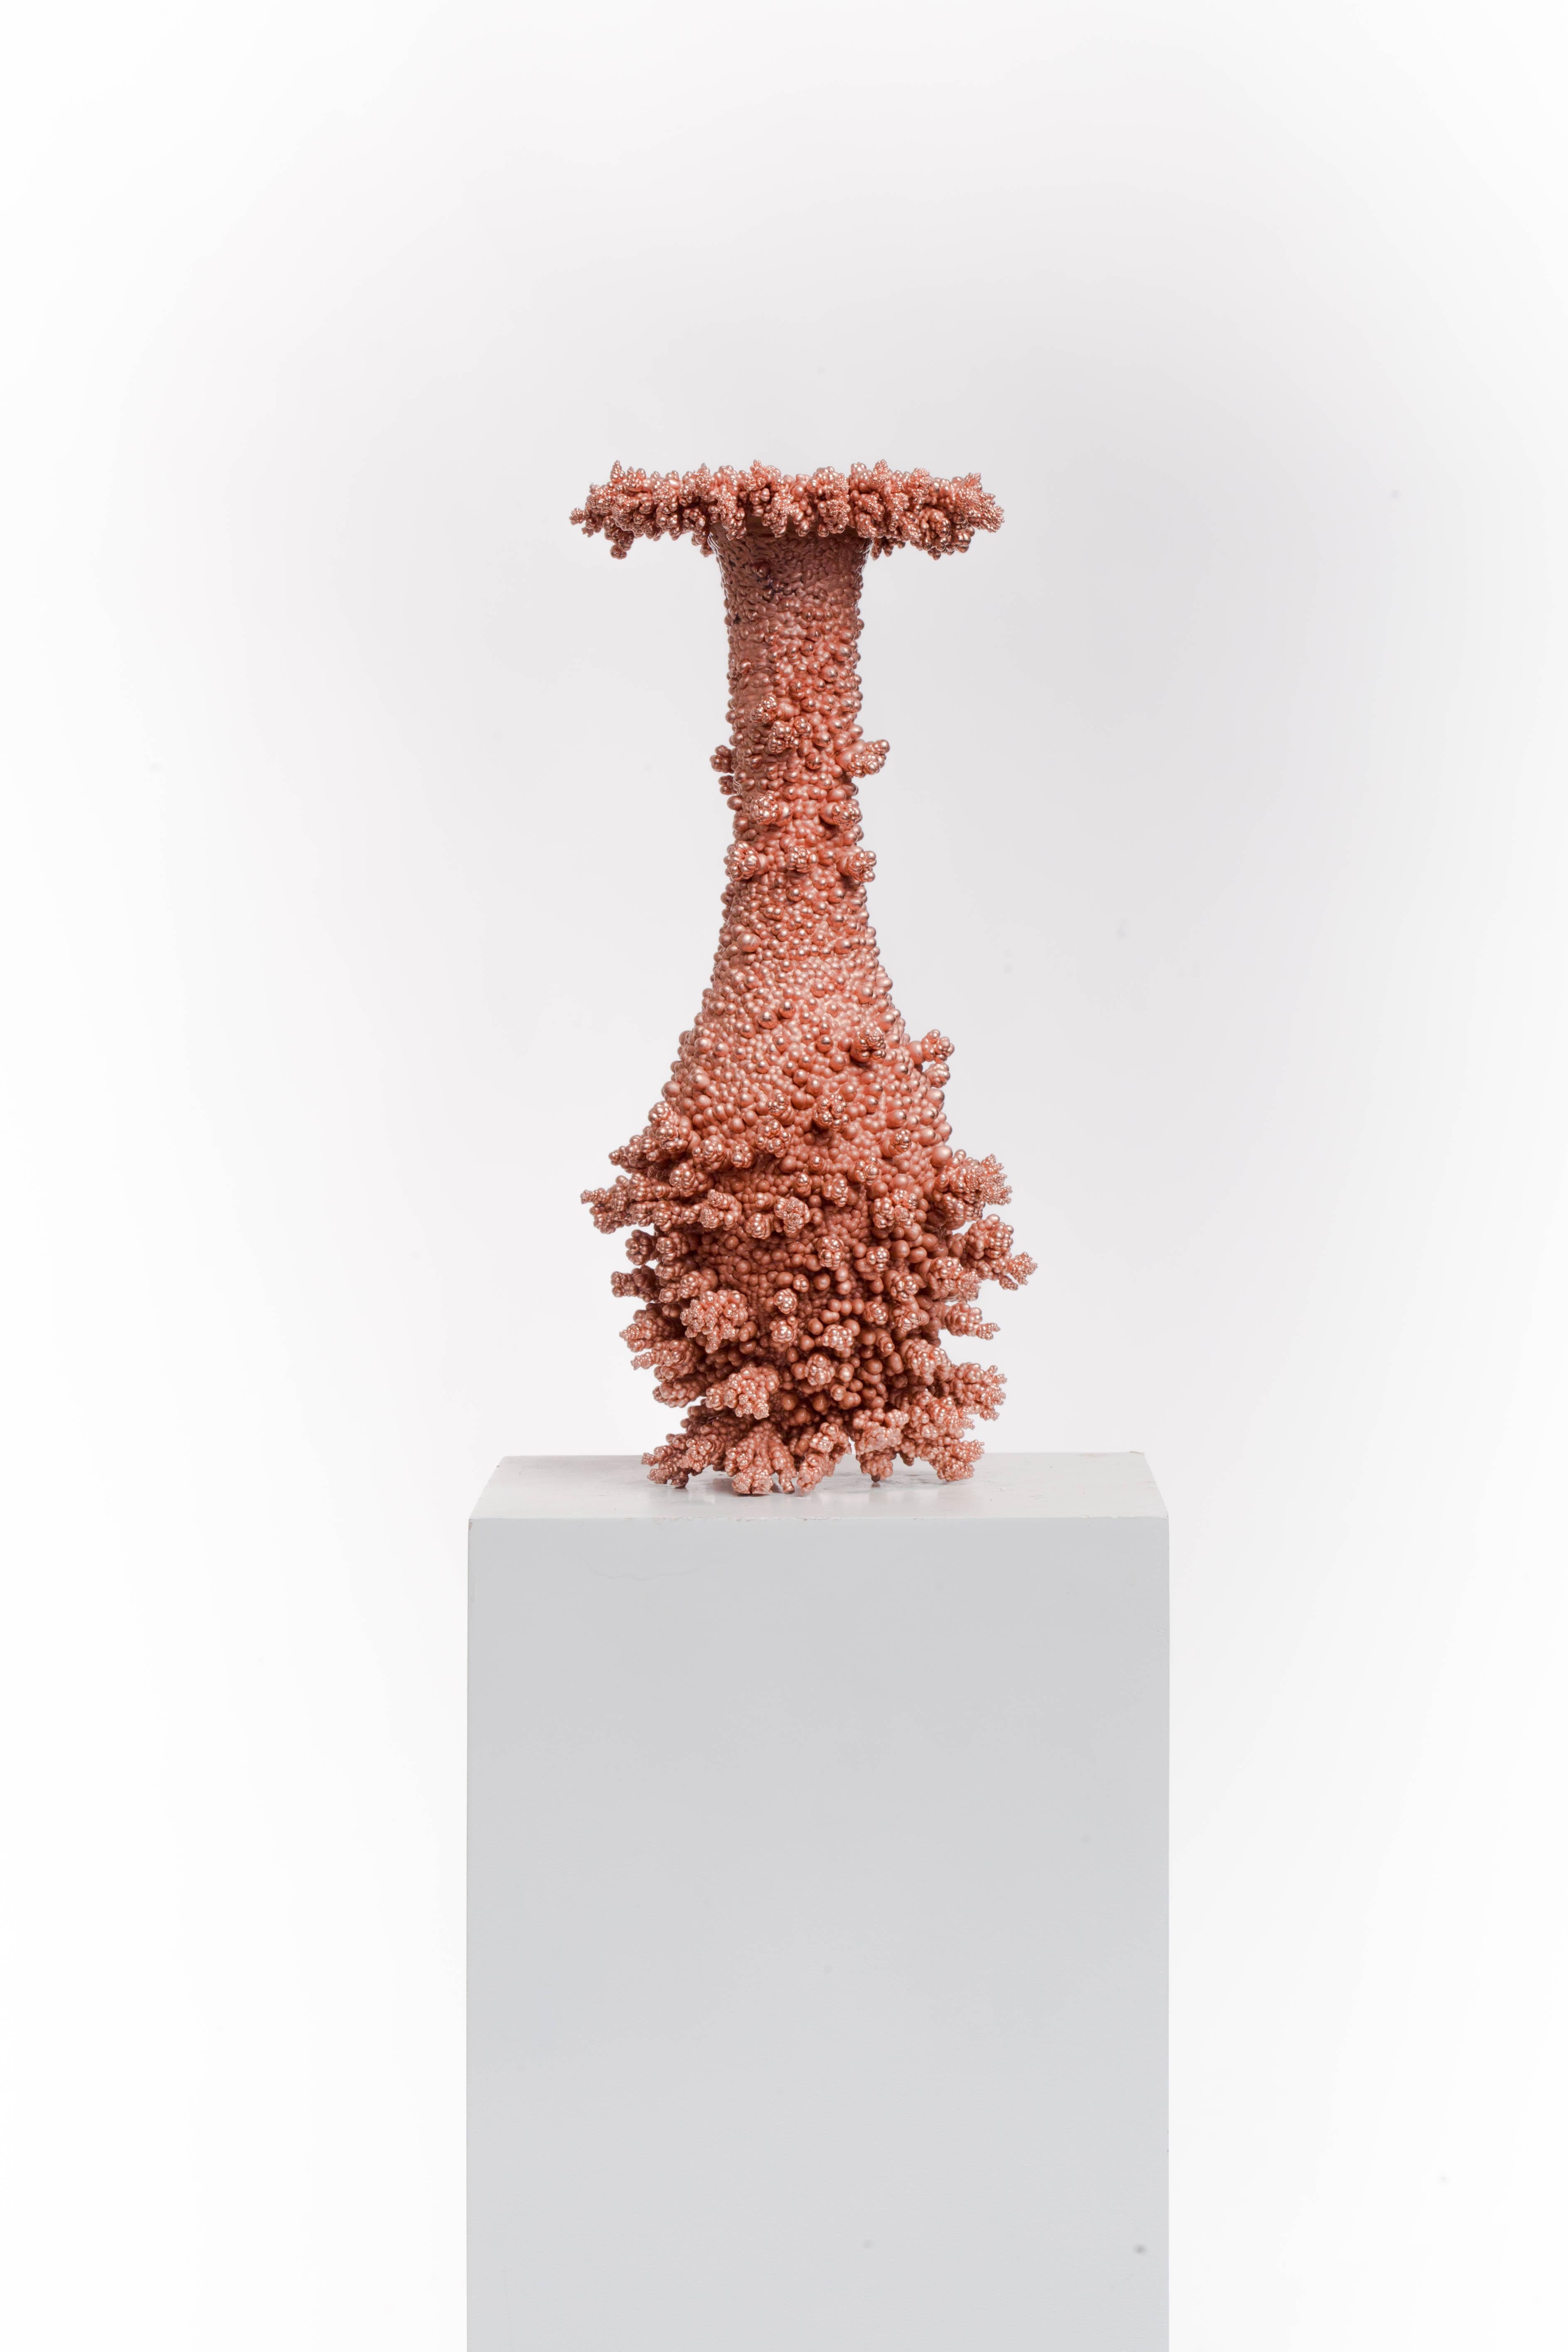 Driaan Claassen Abstract Sculpture - Copper, Crystal, Polished, Raw, Abstract, Contemporary, Modern, Art, Sculpture